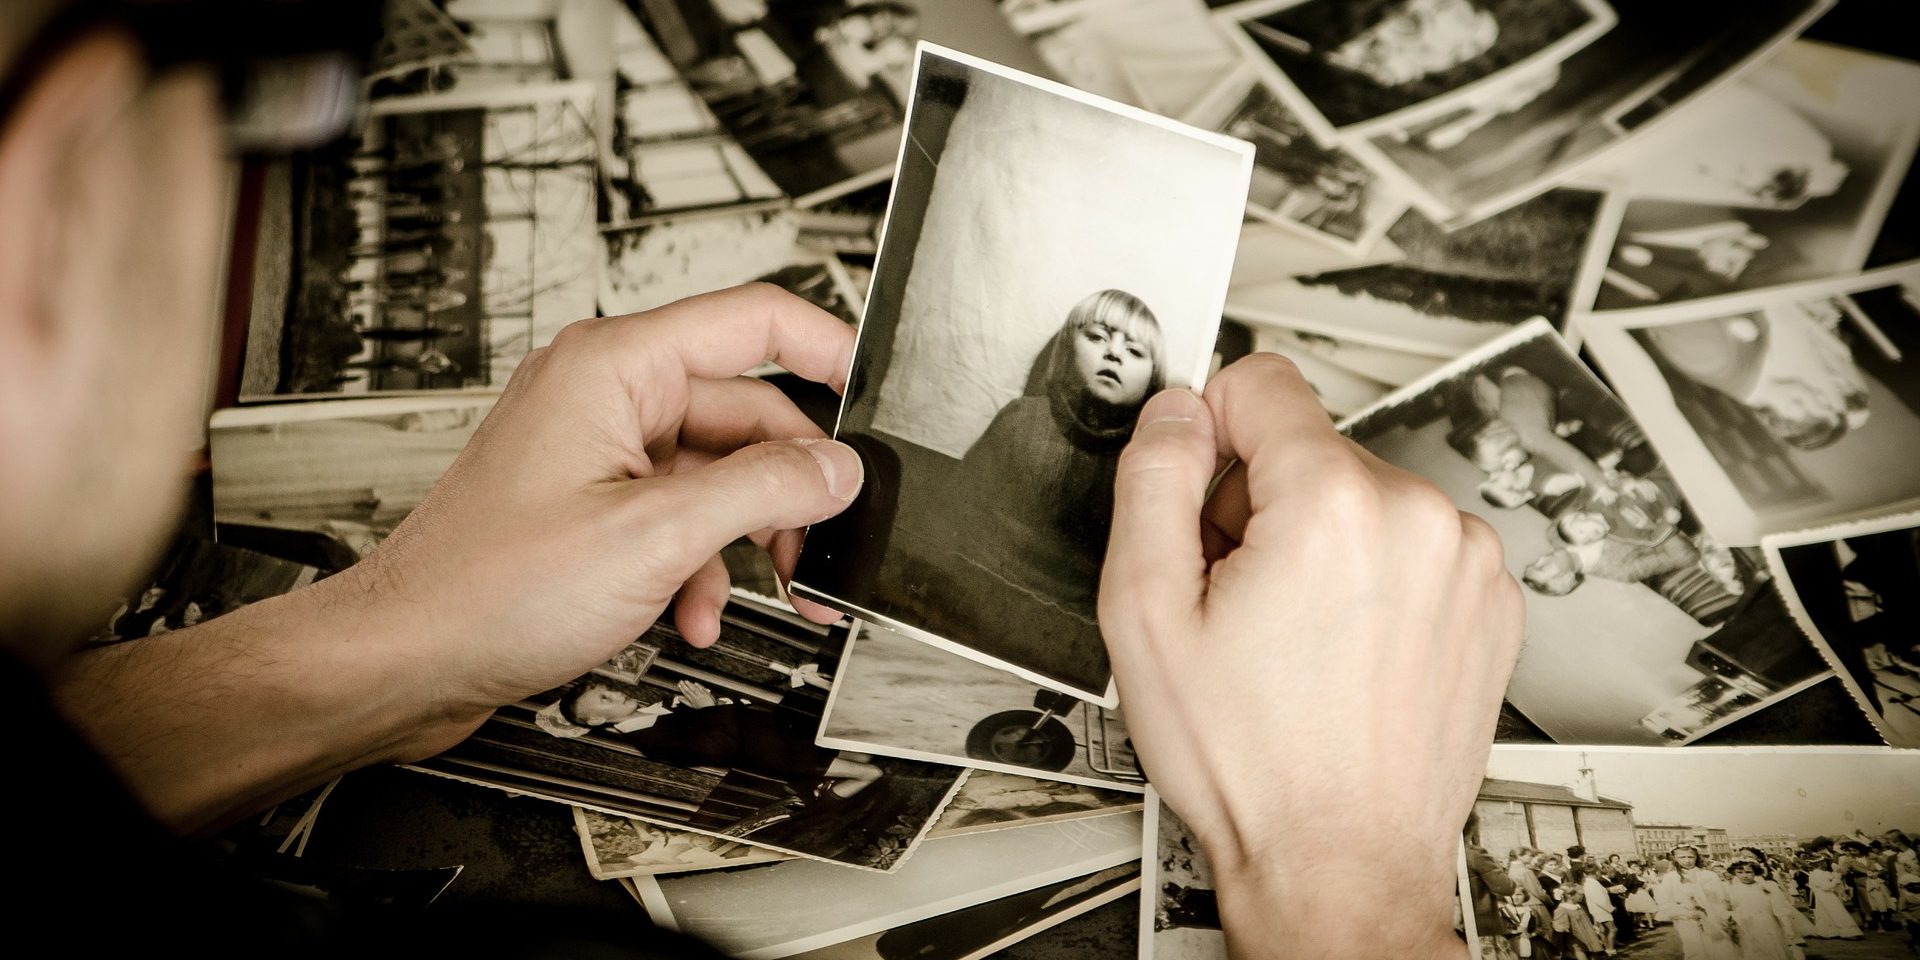 Black and white photos laid on table. The back of a person's head, with their hands holding a photo.